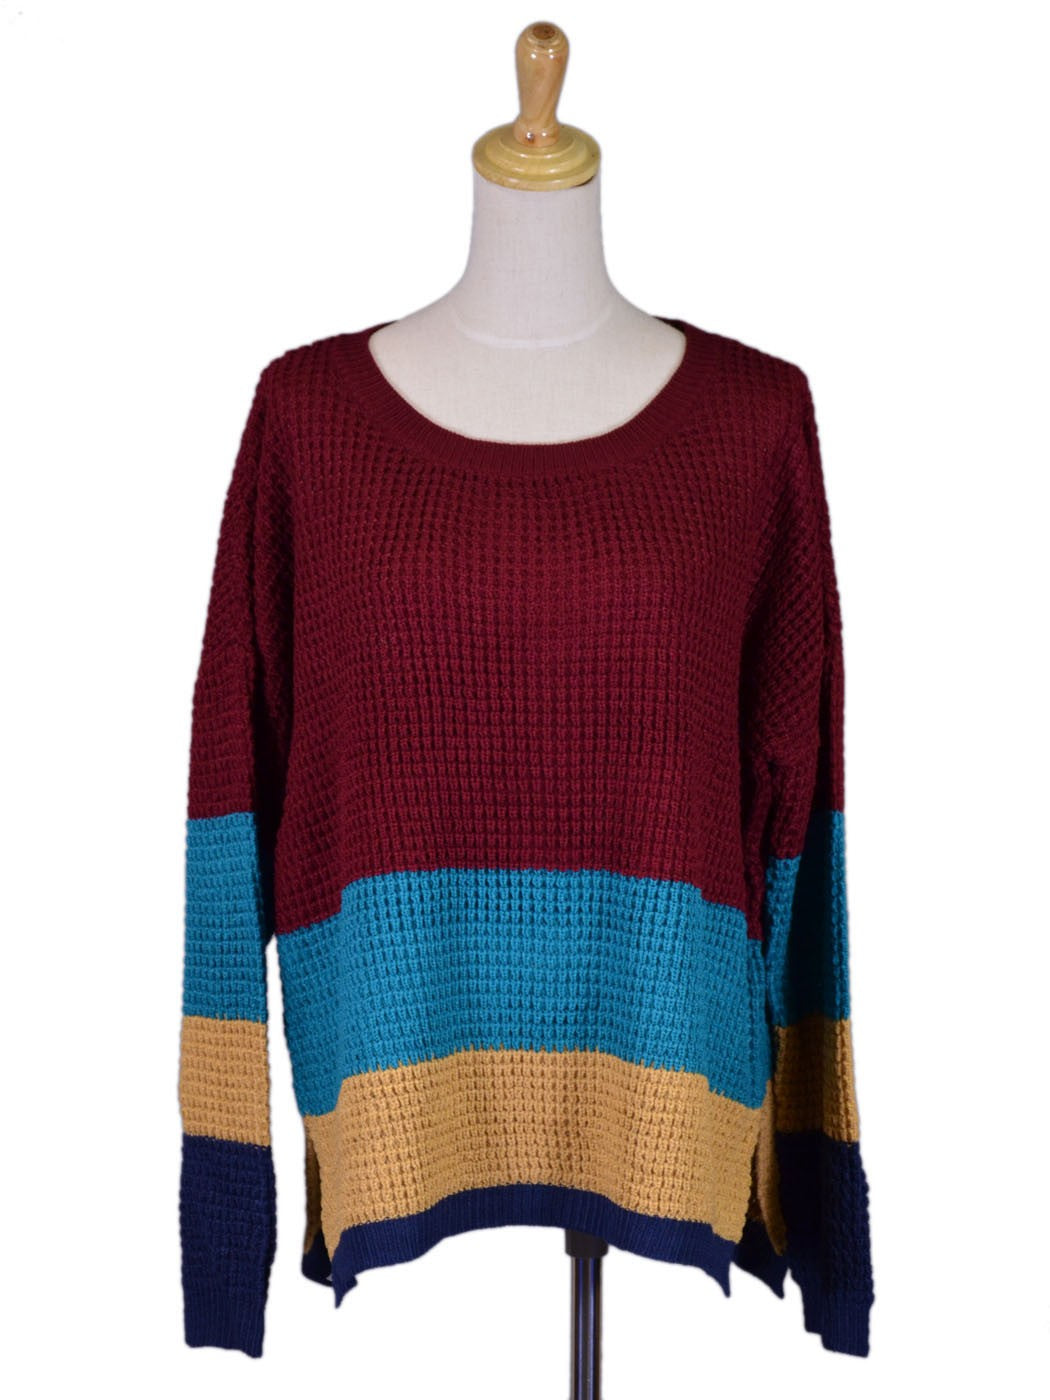 Everly Brand Red, Blue & Tan Color Block Look Thick Cable Knit Sweater